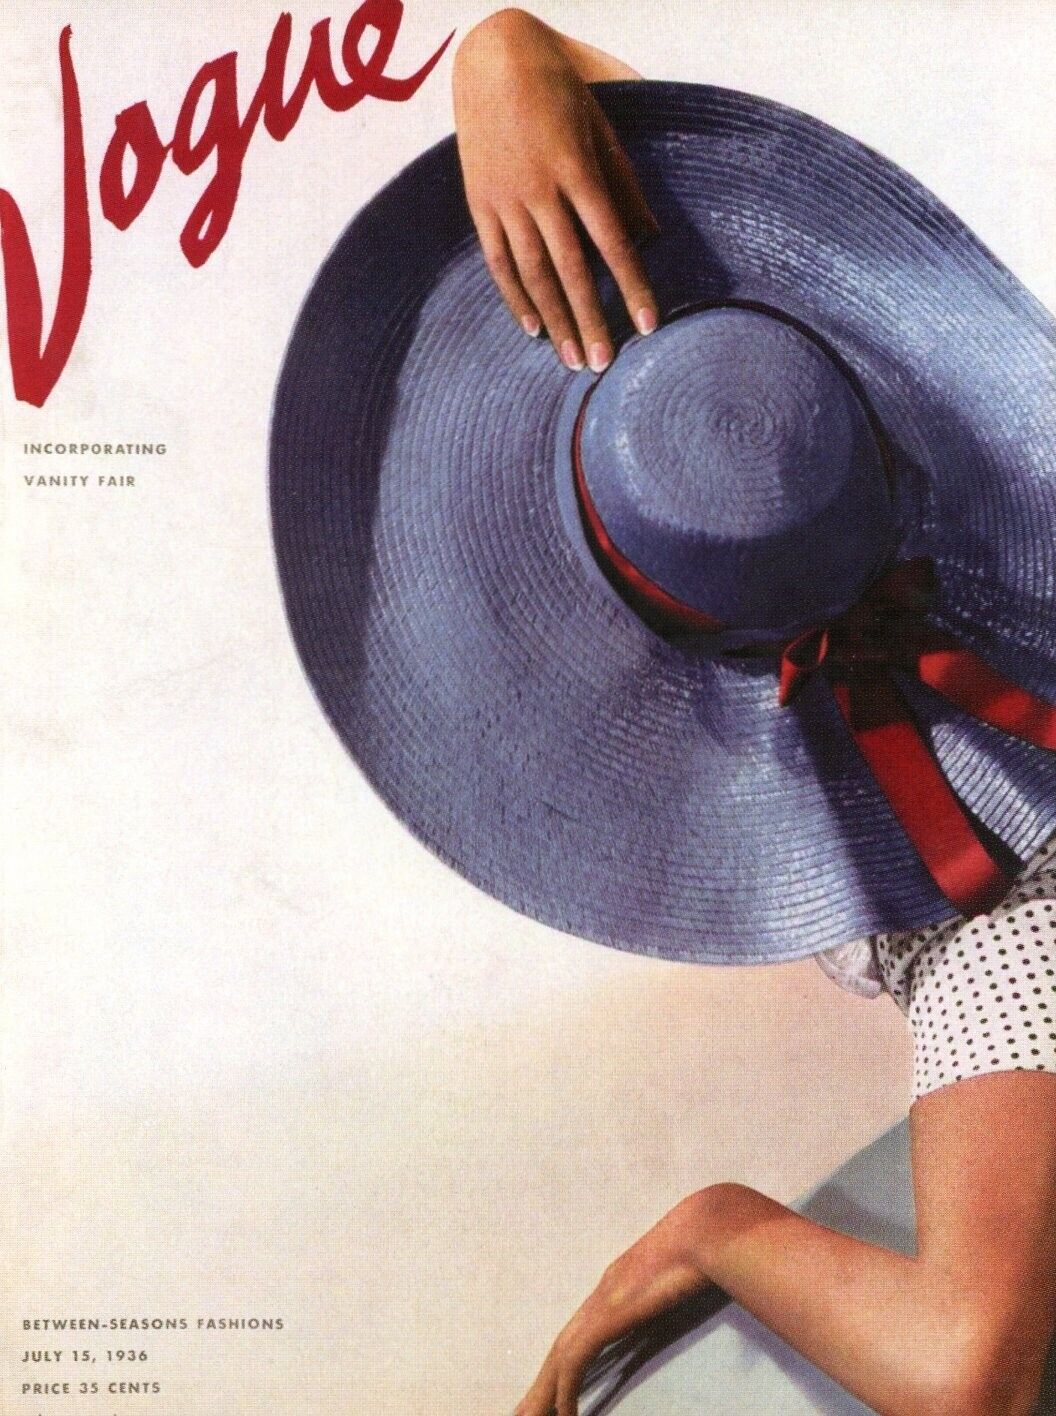 Vogue Magazine Cover, July 15, 1936 by Horst P. Horst--POSTCARD